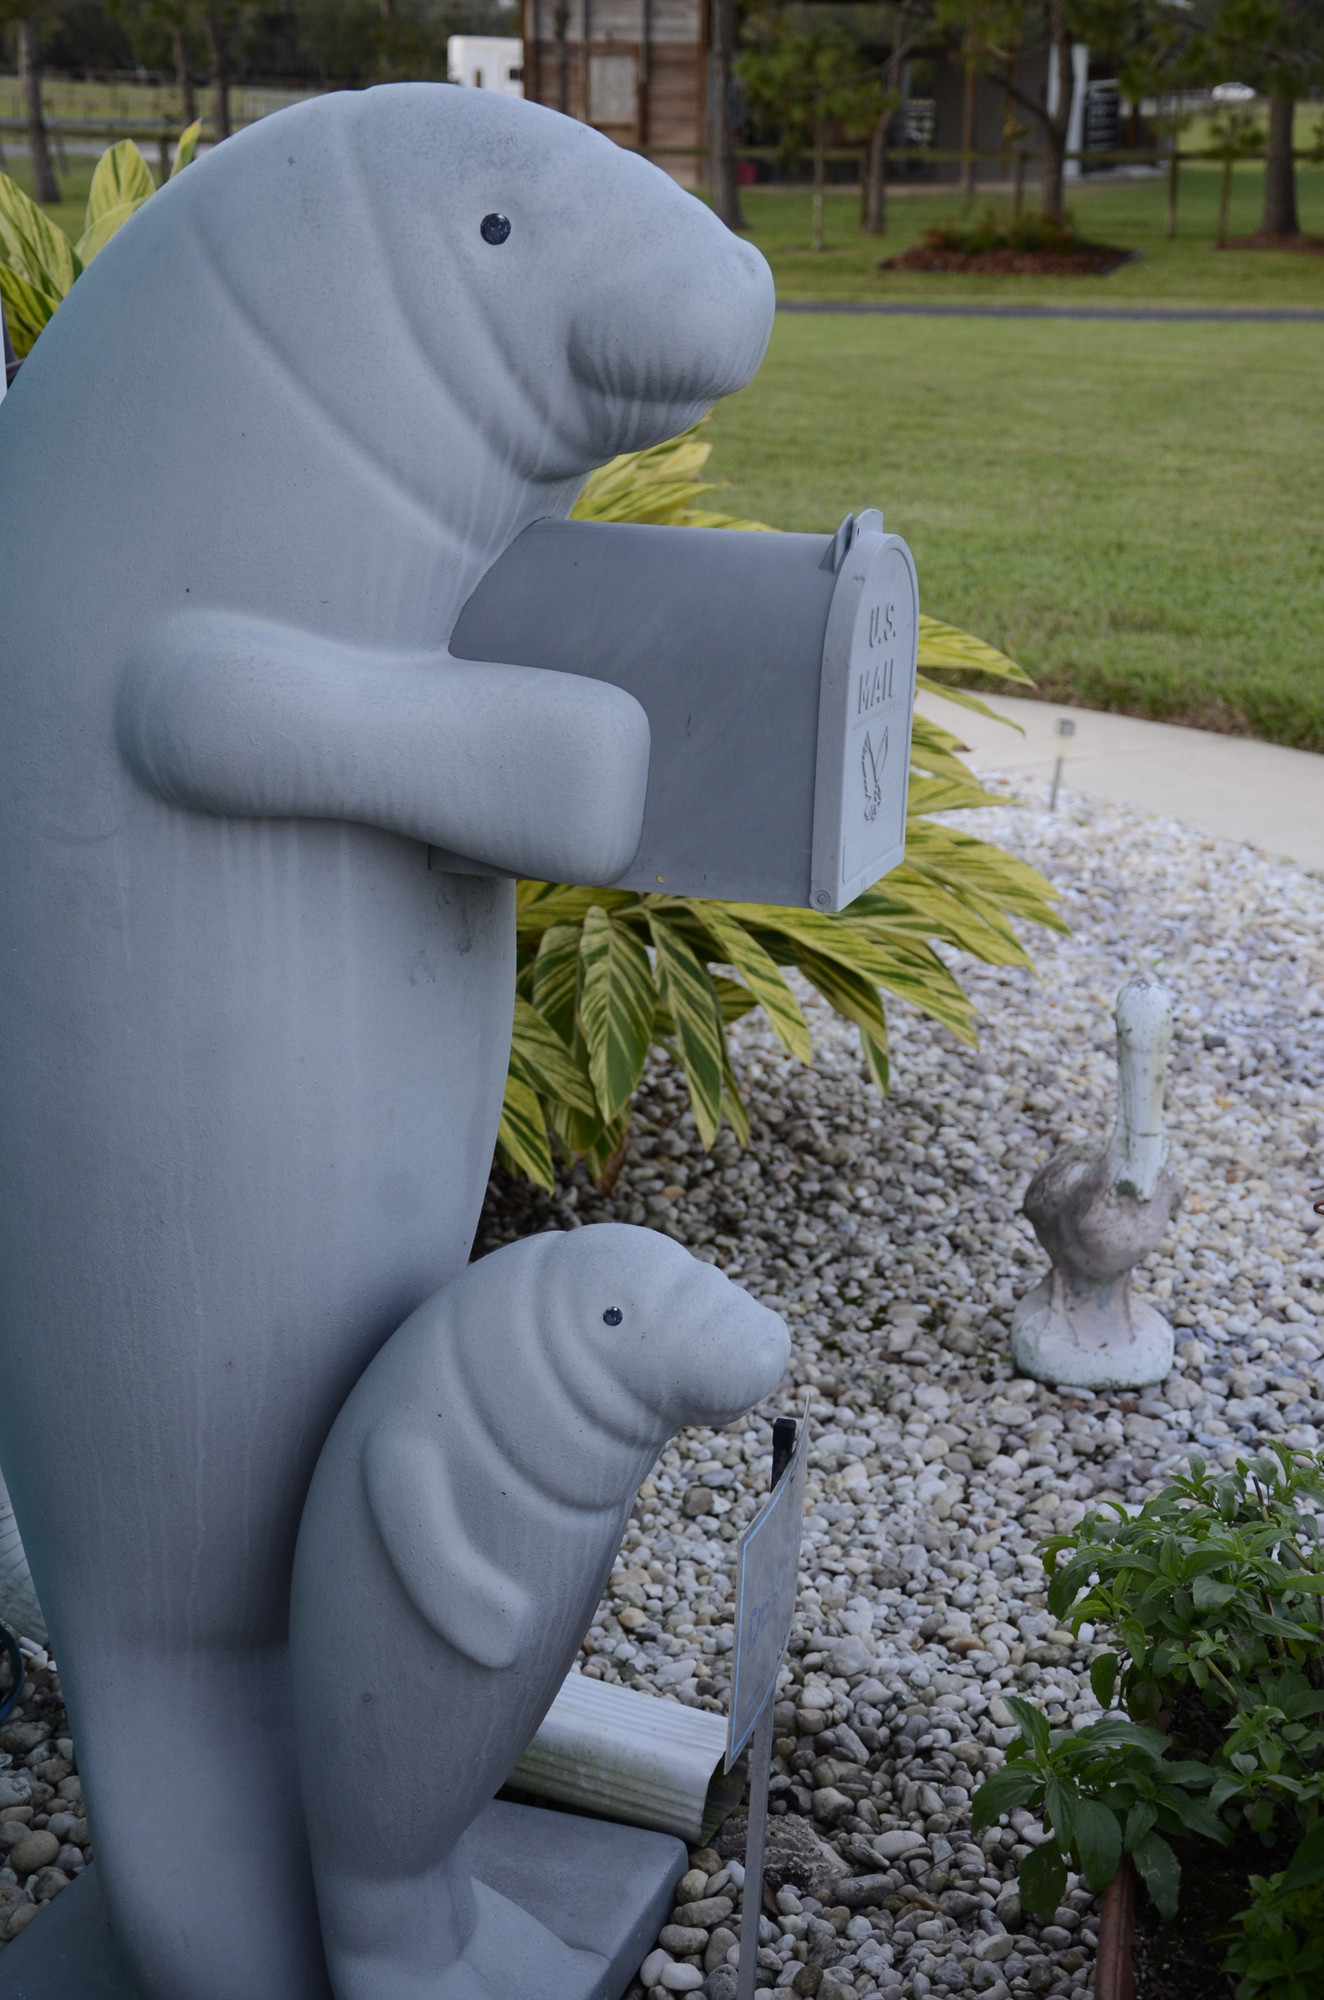 The Ciemniecki's mail is delivered into a manatee-themed mail box.